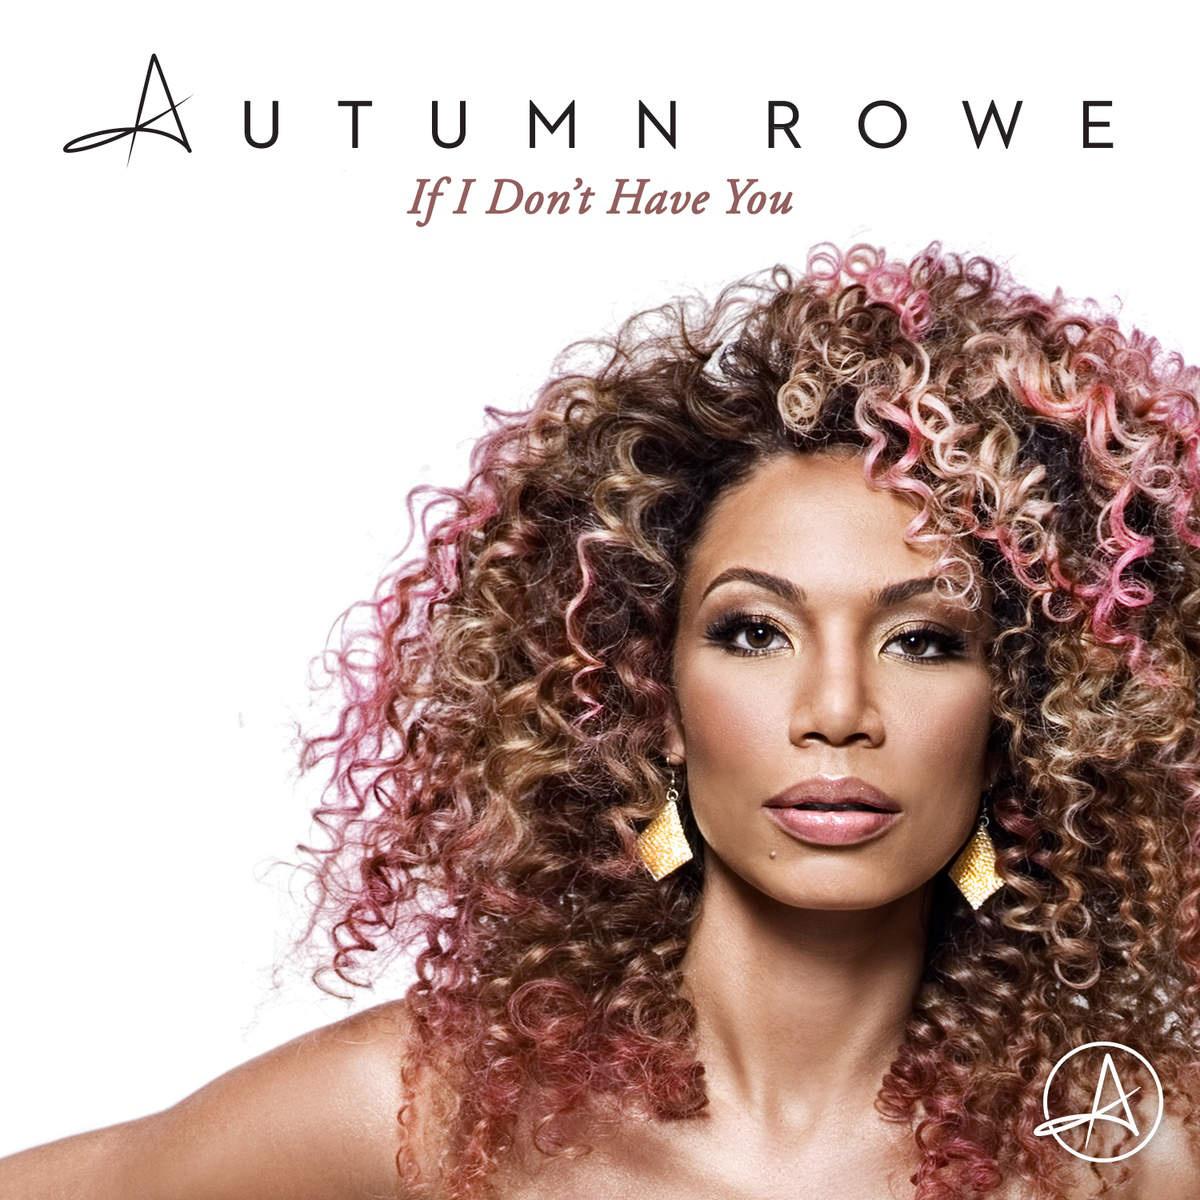 Autumn Rowe - If I Don't Have You